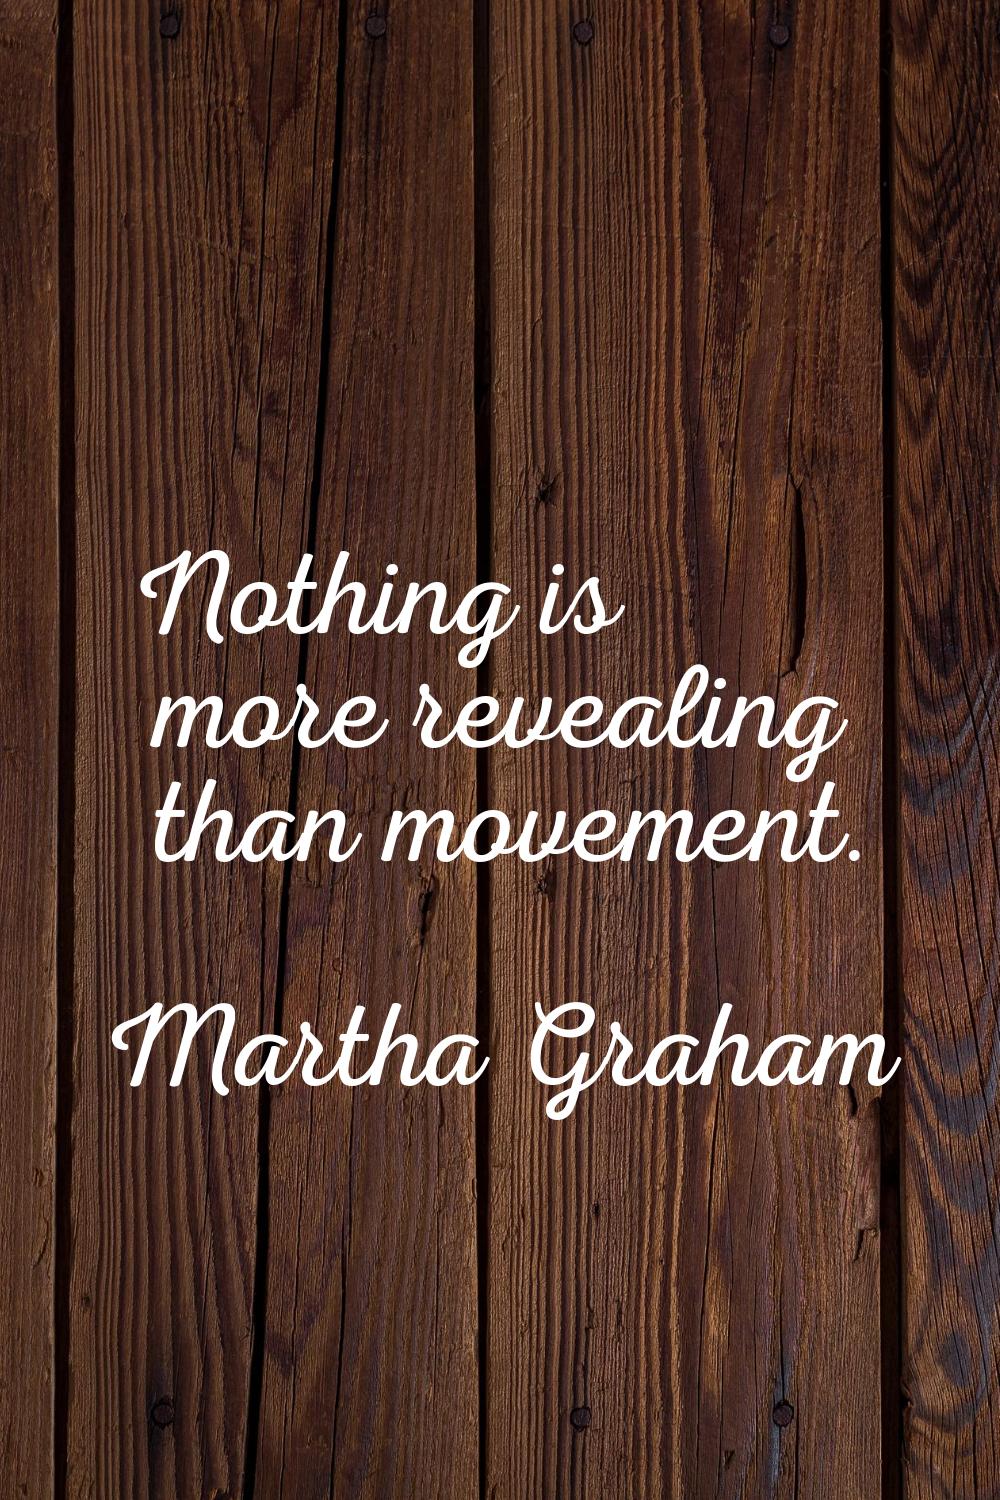 Nothing is more revealing than movement.